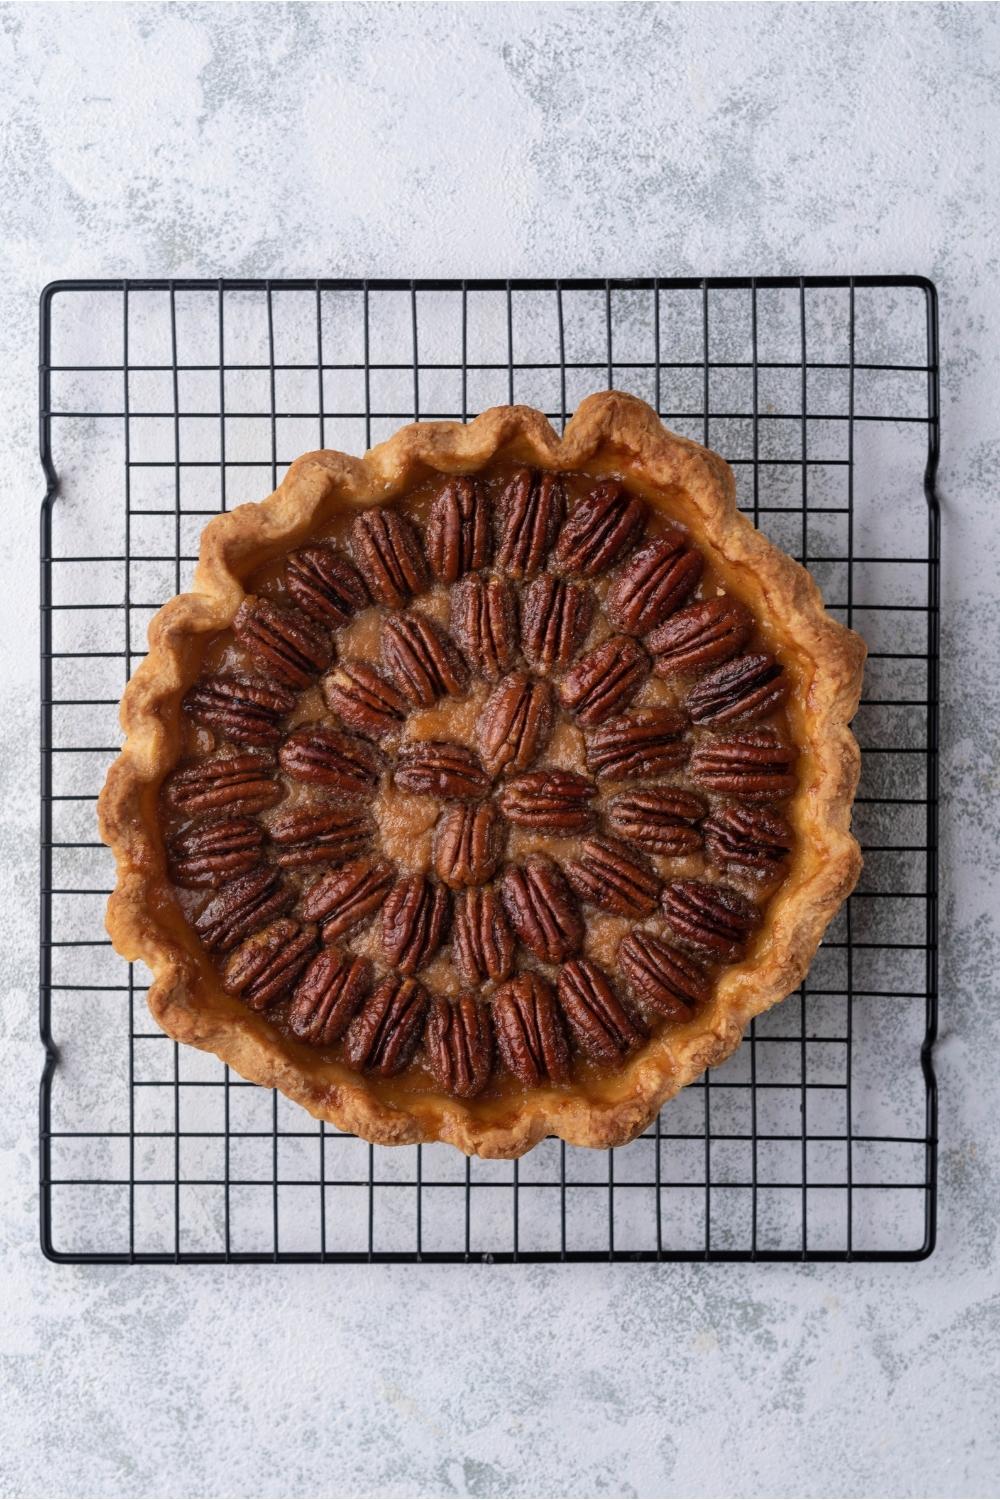 Freshly baked sweet potato pie with pecan topping cooling on a baking rack.